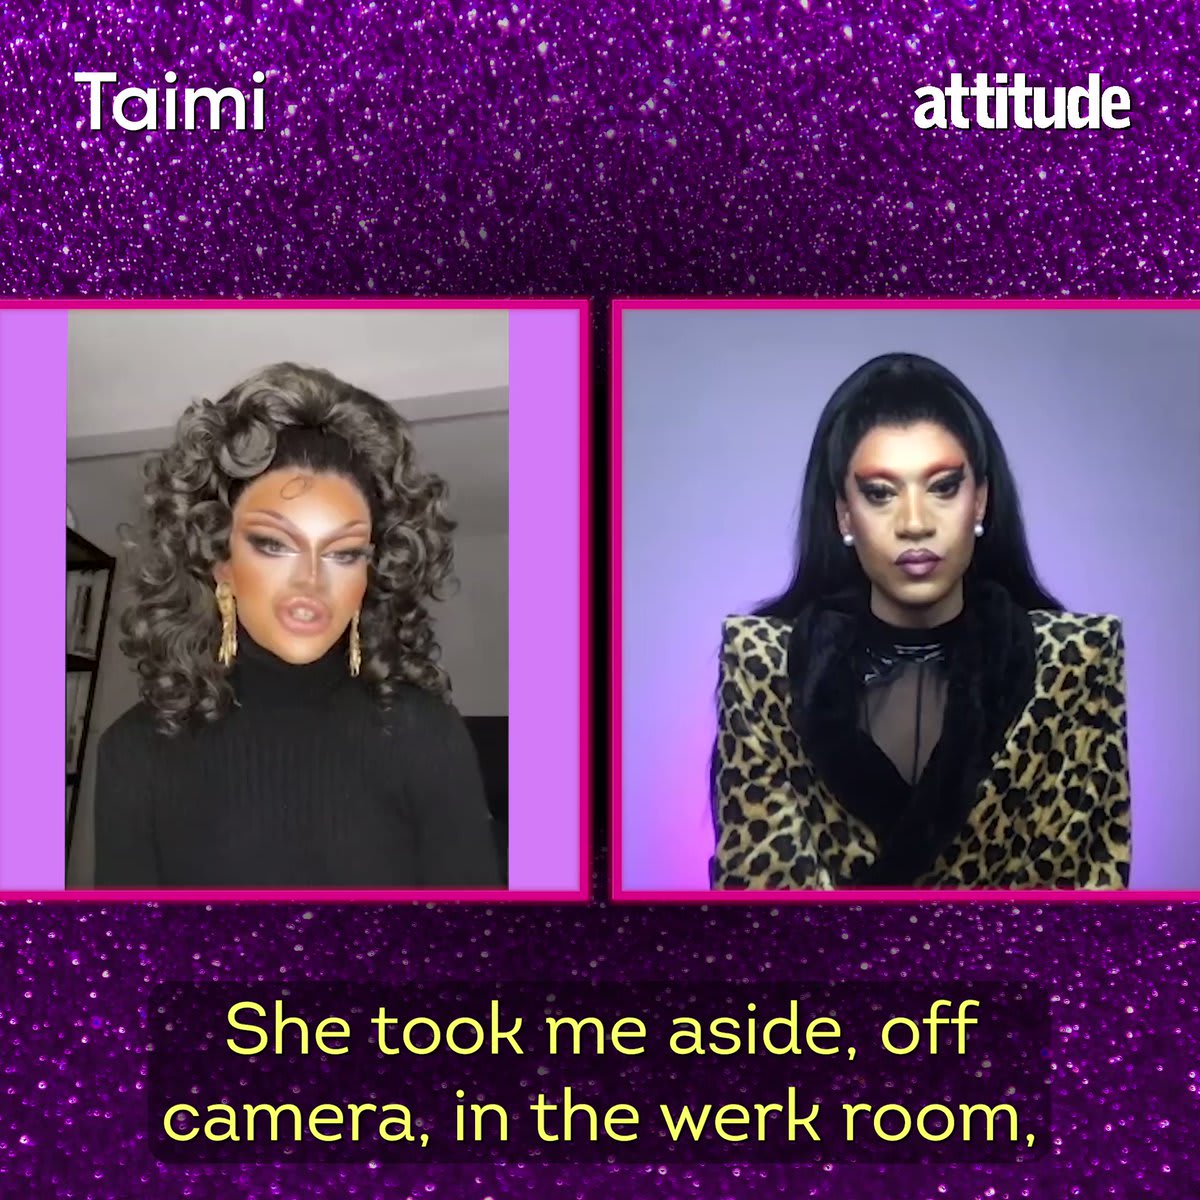 DragRaceUK's Krystal Versace reveals to @TiaKofi that RuPaul was still full of praise for her when the cameras weren't rolling. Watch Tea Time in association with @taimiapp ➡️